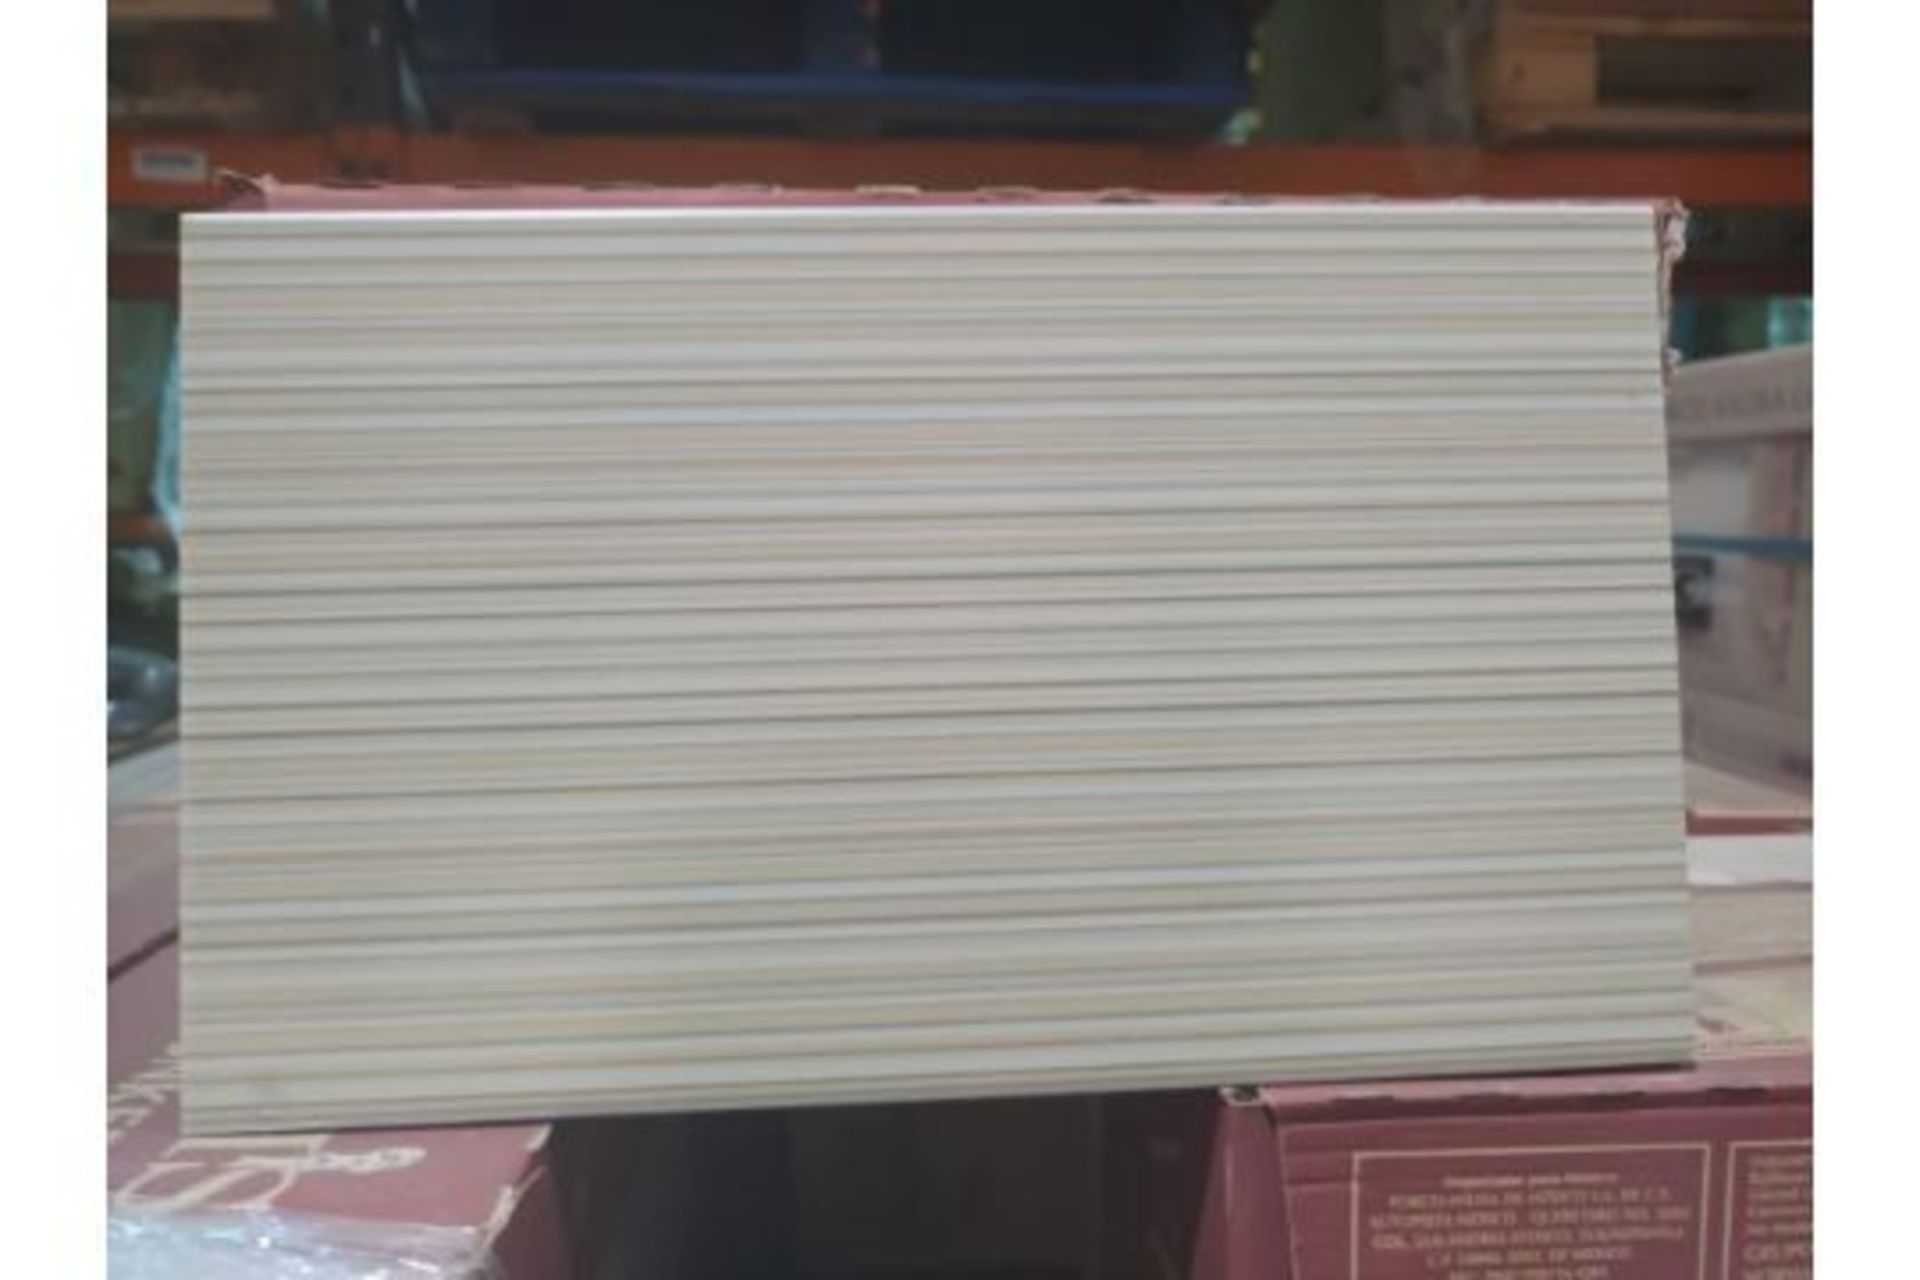 10 x PACKS OF PORCELANOSA PARK LINEA COLOR THREADS WALL TILES. SIZE: 200x316mm. Each box contains